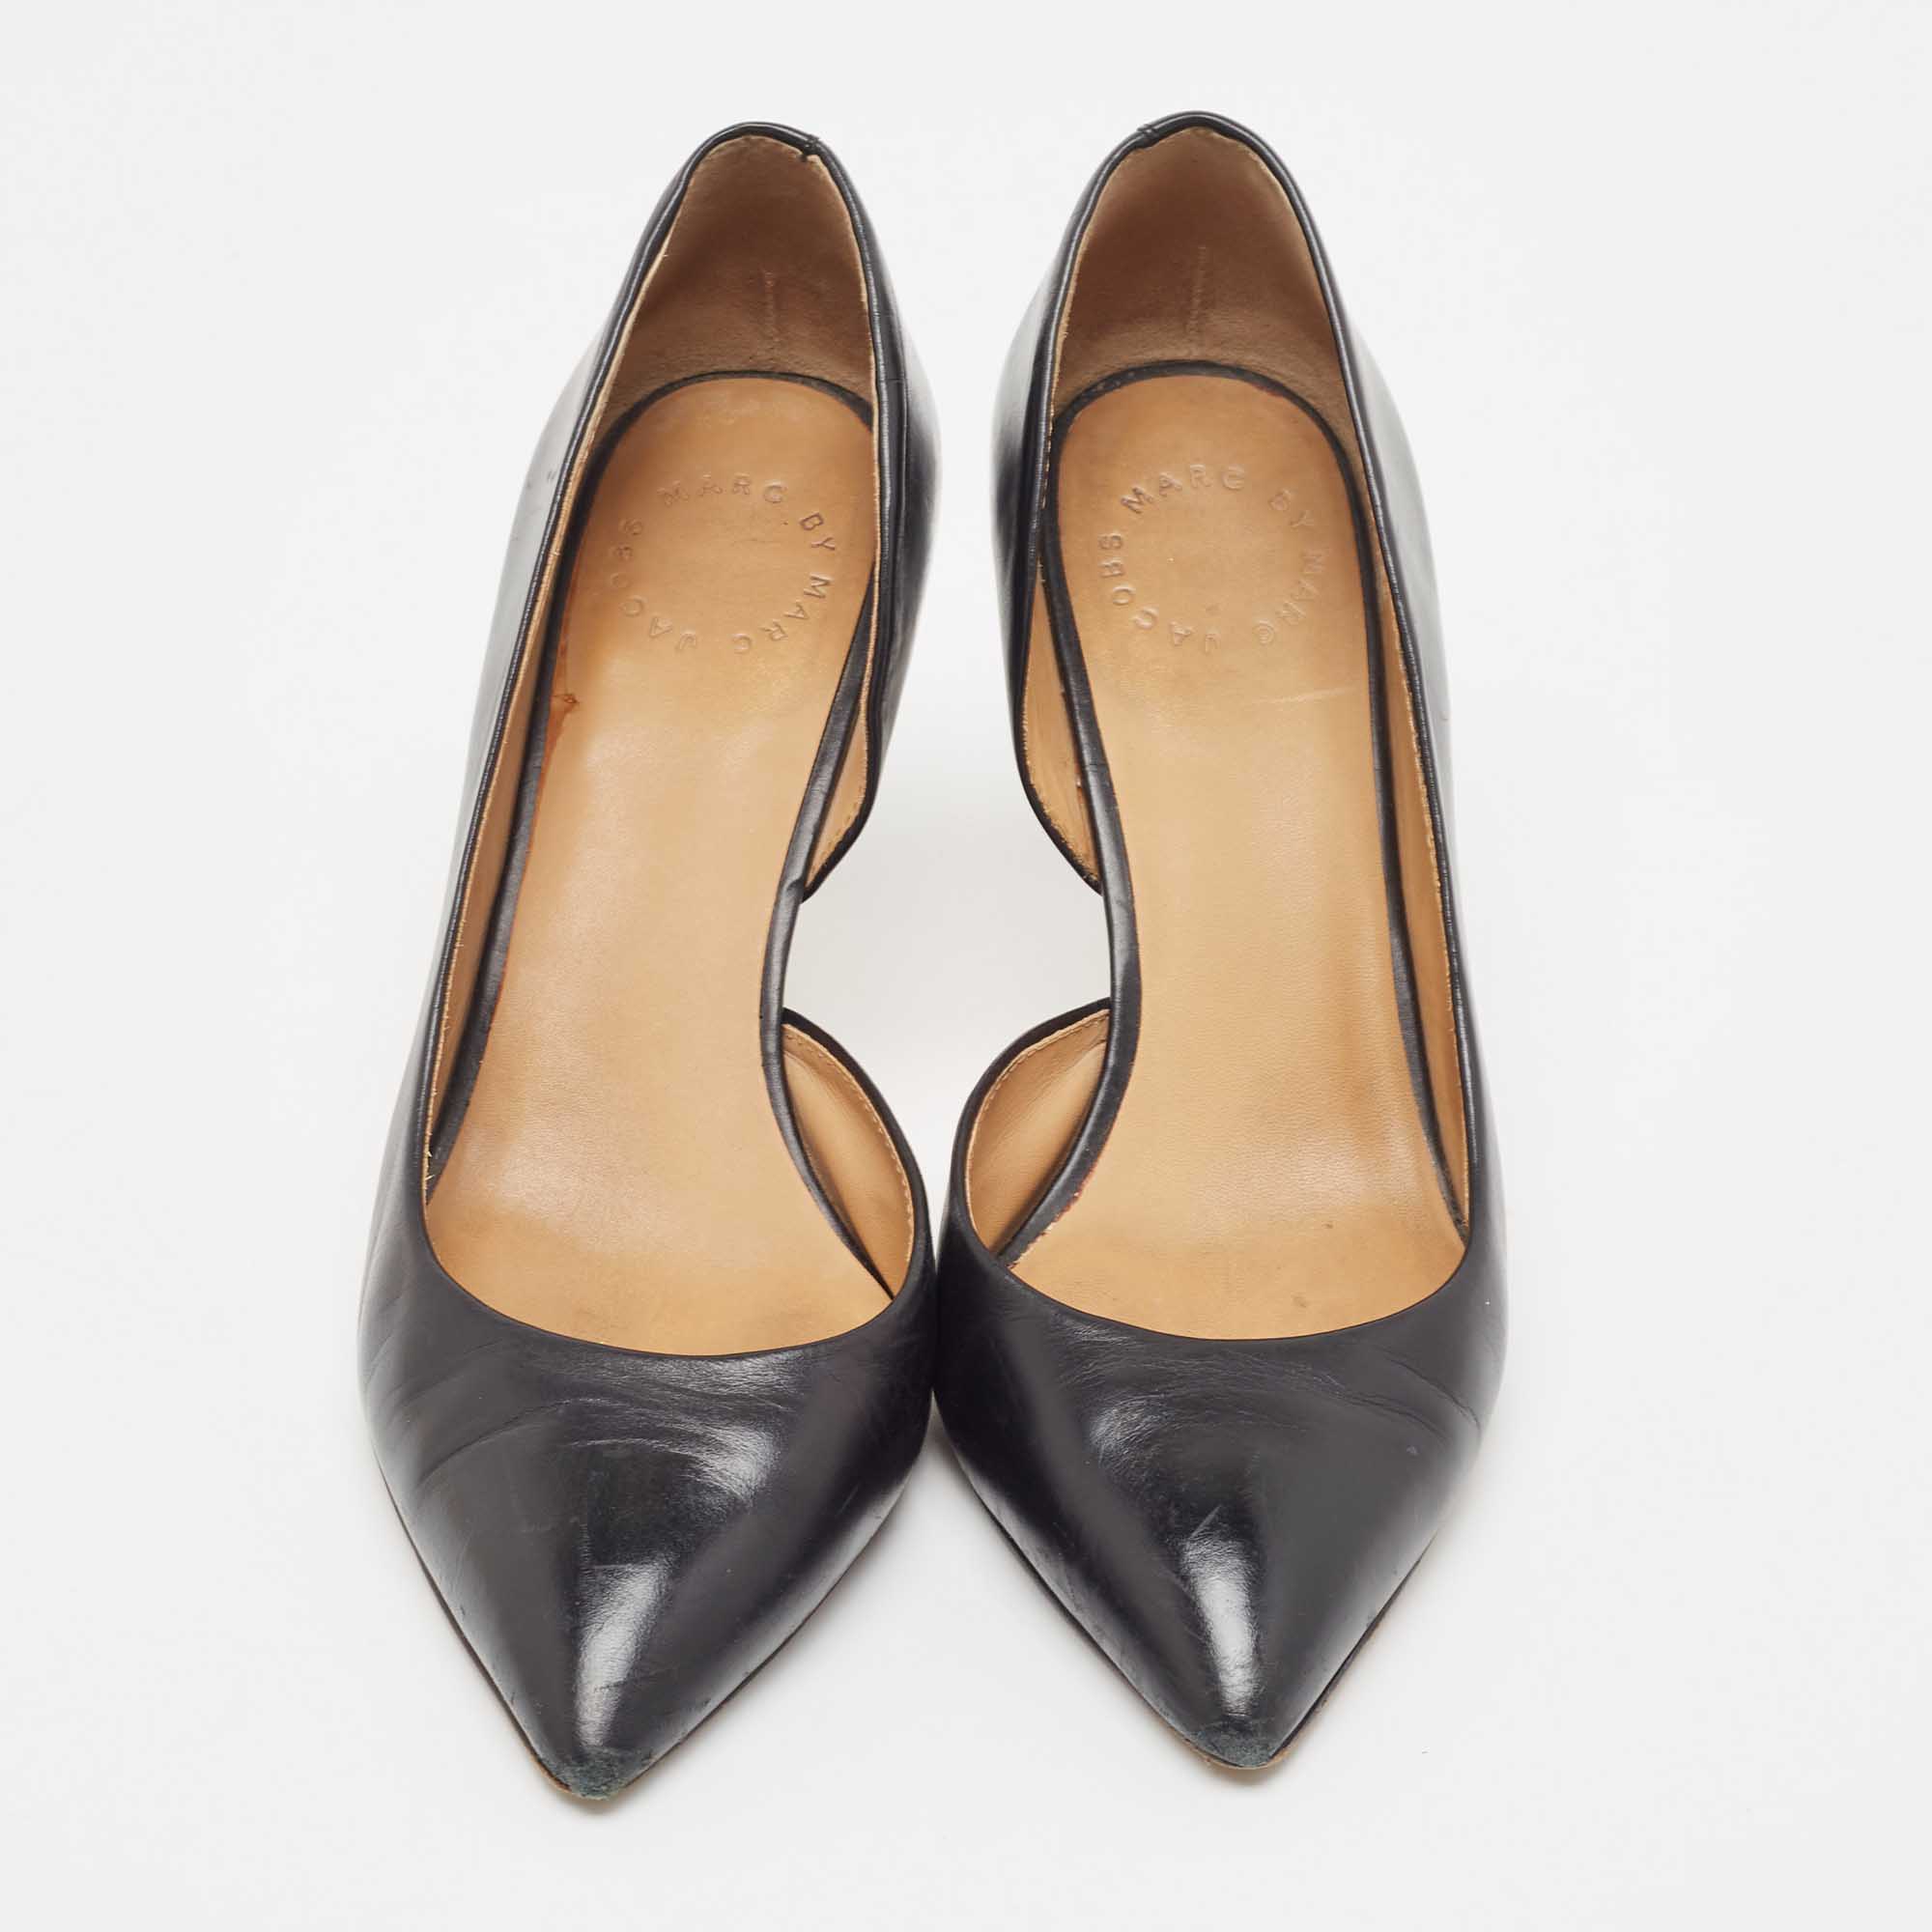 Marc By Marc Jacobs Black Leather D'orsay Pumps Size 38.5